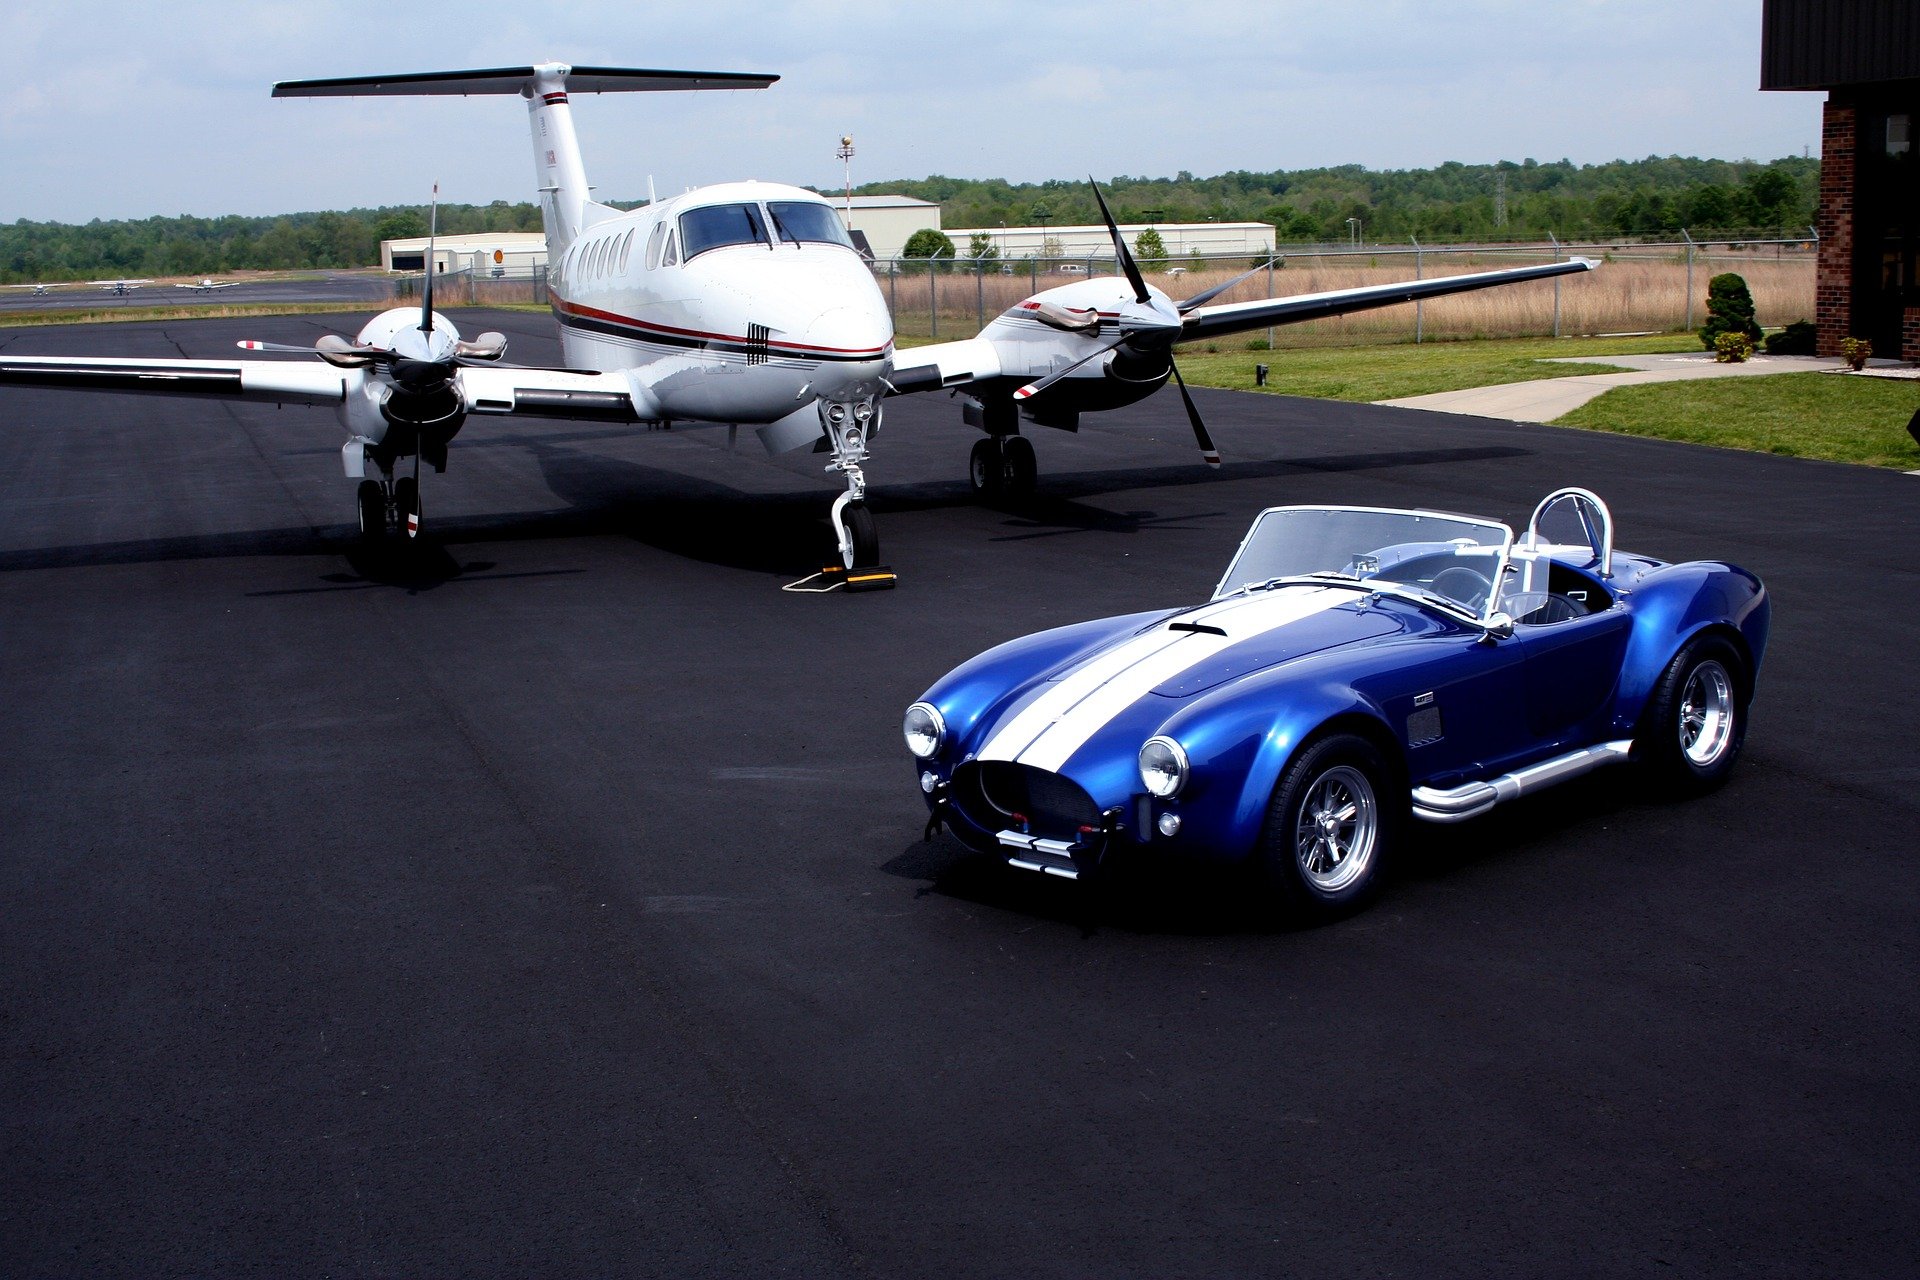 Private Plane and Shelby Cobra | Veteran Car Donations